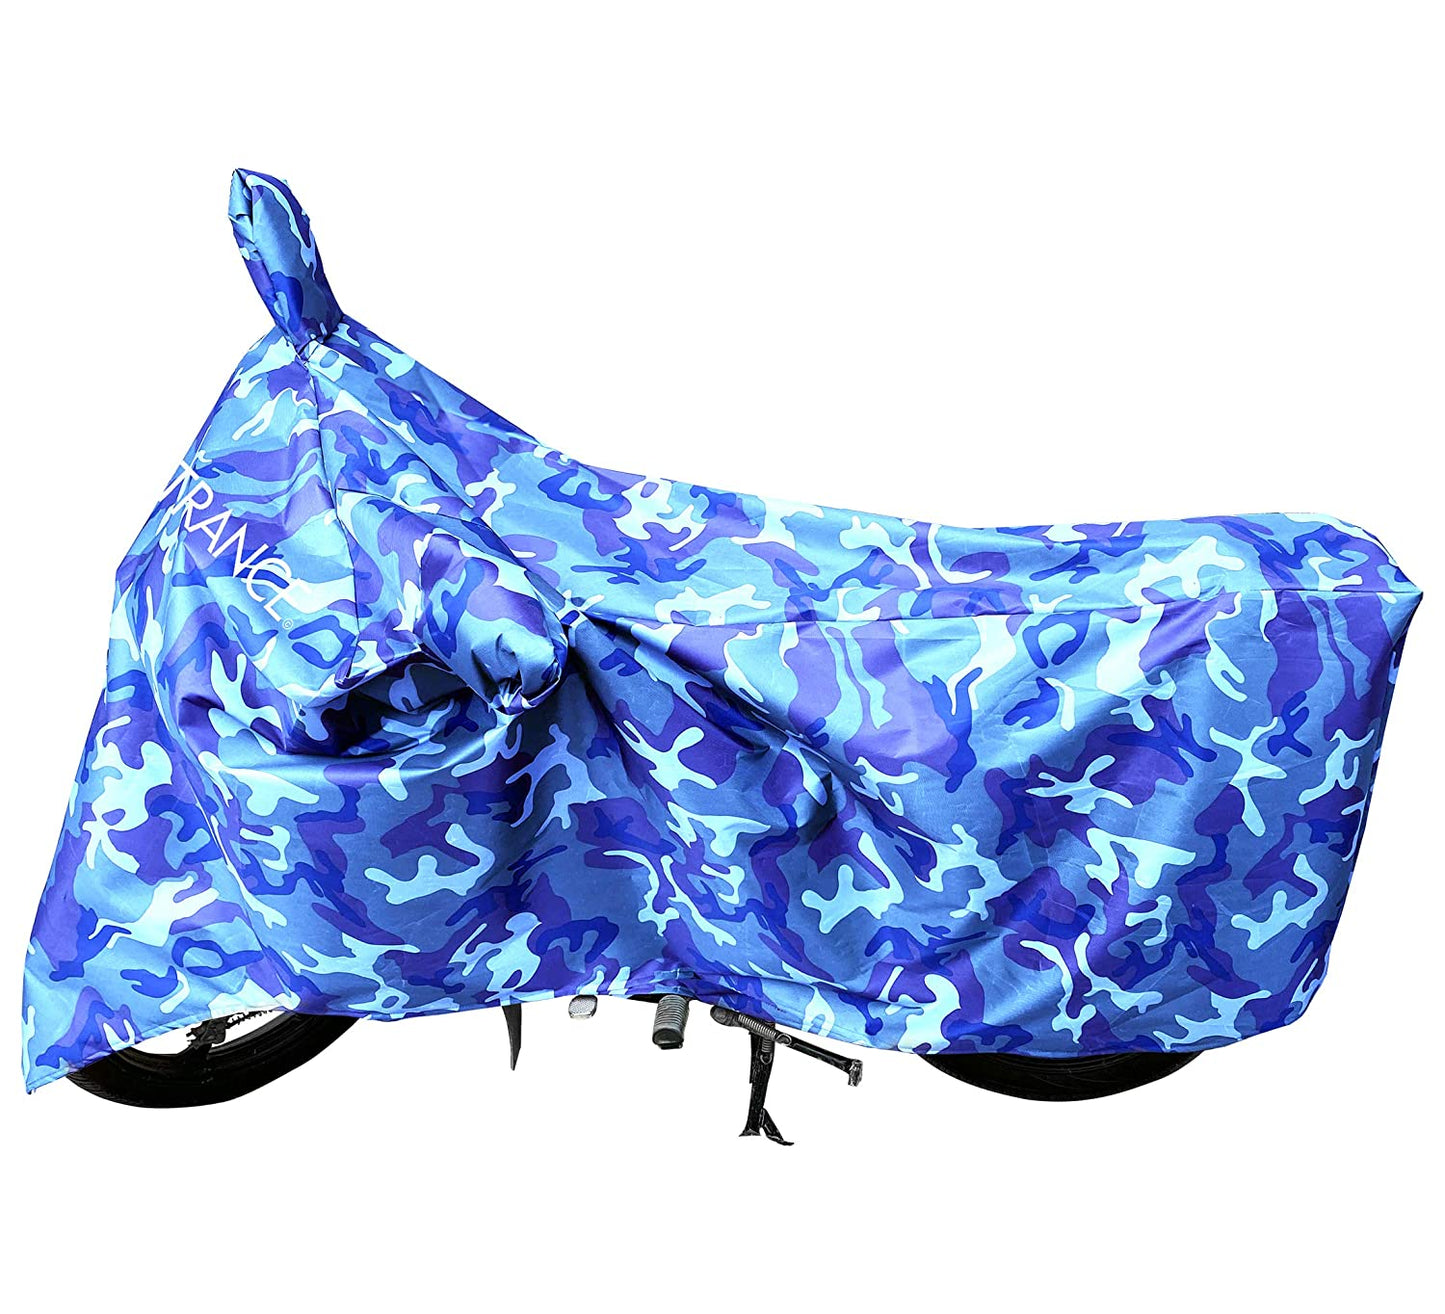 MotoTrance Jungle Bike Body Covers For Royal Enfield Himalayan - Interlock-Stitched Waterproof and Heat Resistant with Mirror Pockets